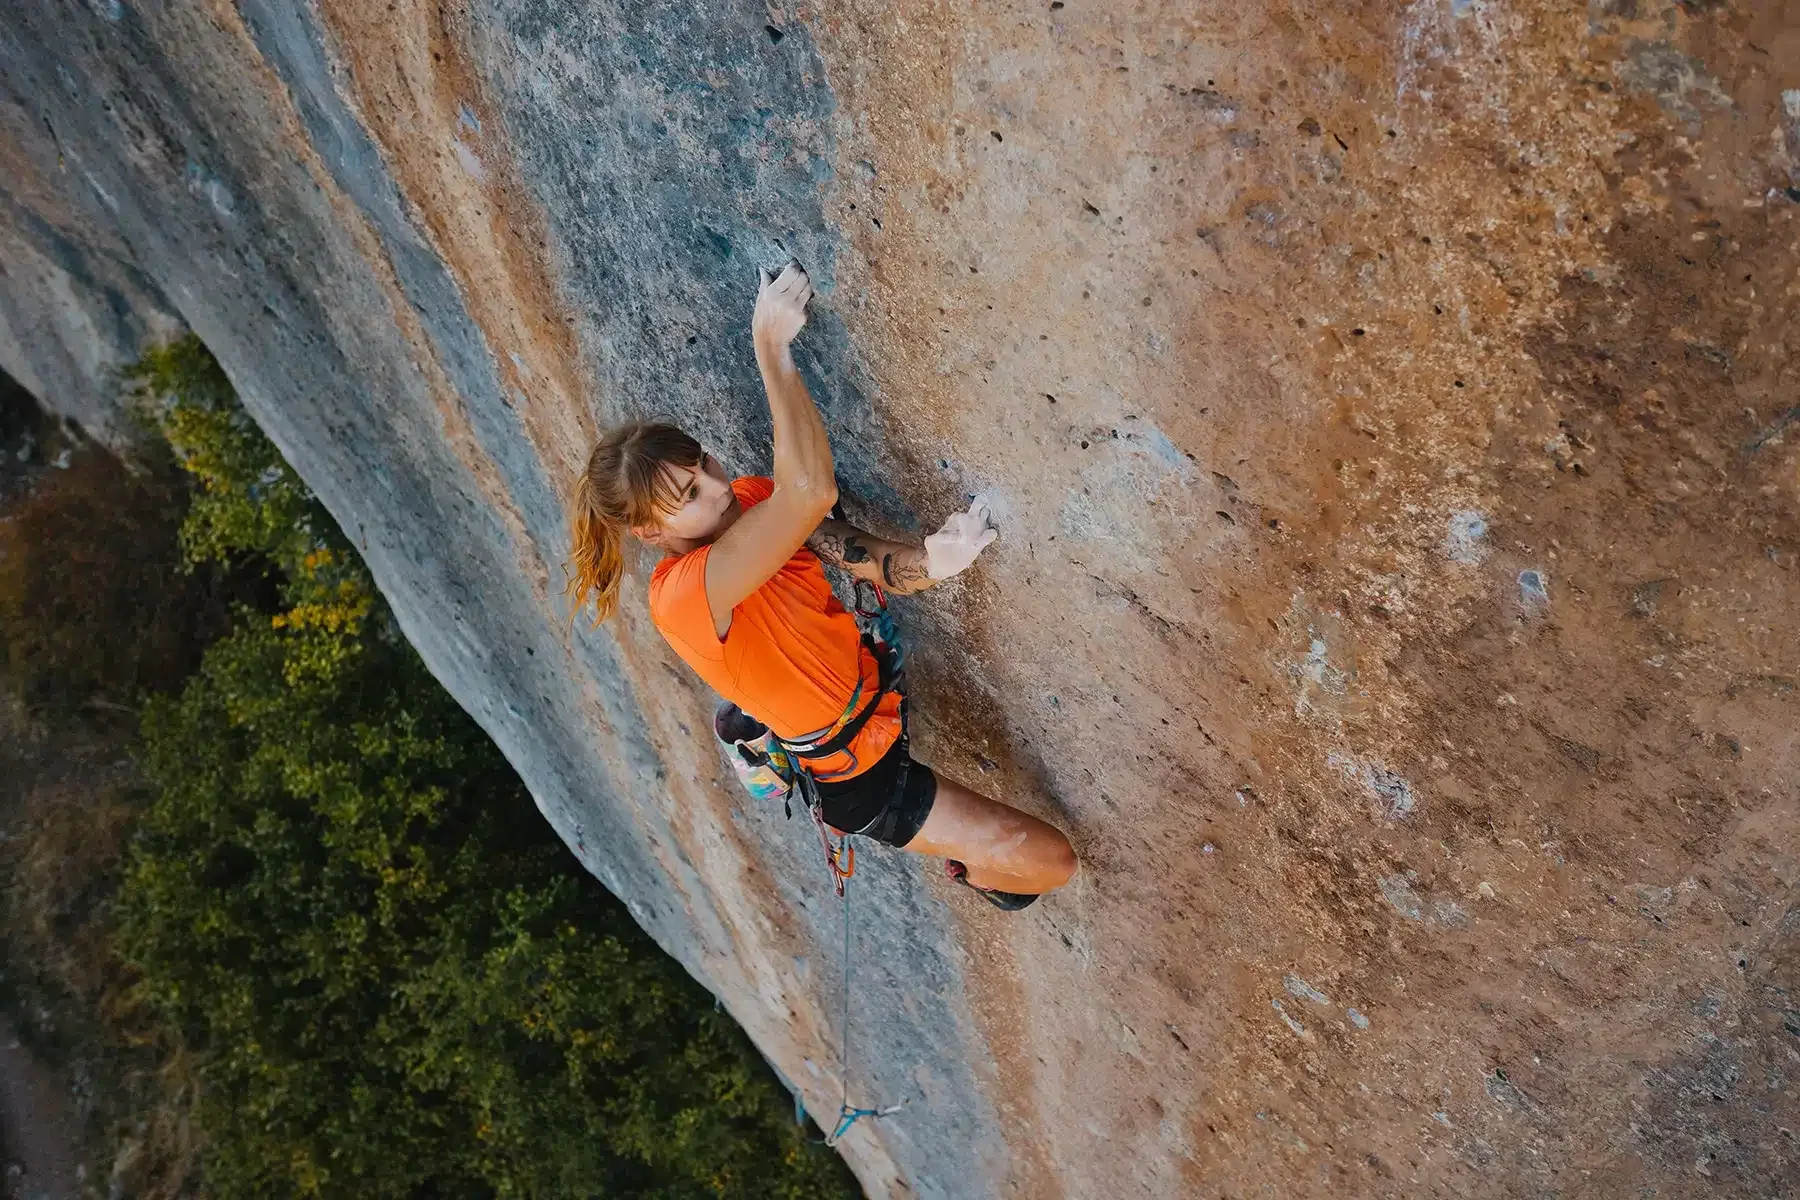 A woman wearing an orange top and black shorts is climbing a steep rock face. Her left hand is reaching for a small hold while her right hand grips the rock. The view is from above, showing the expanse of the rock and the greenery below.